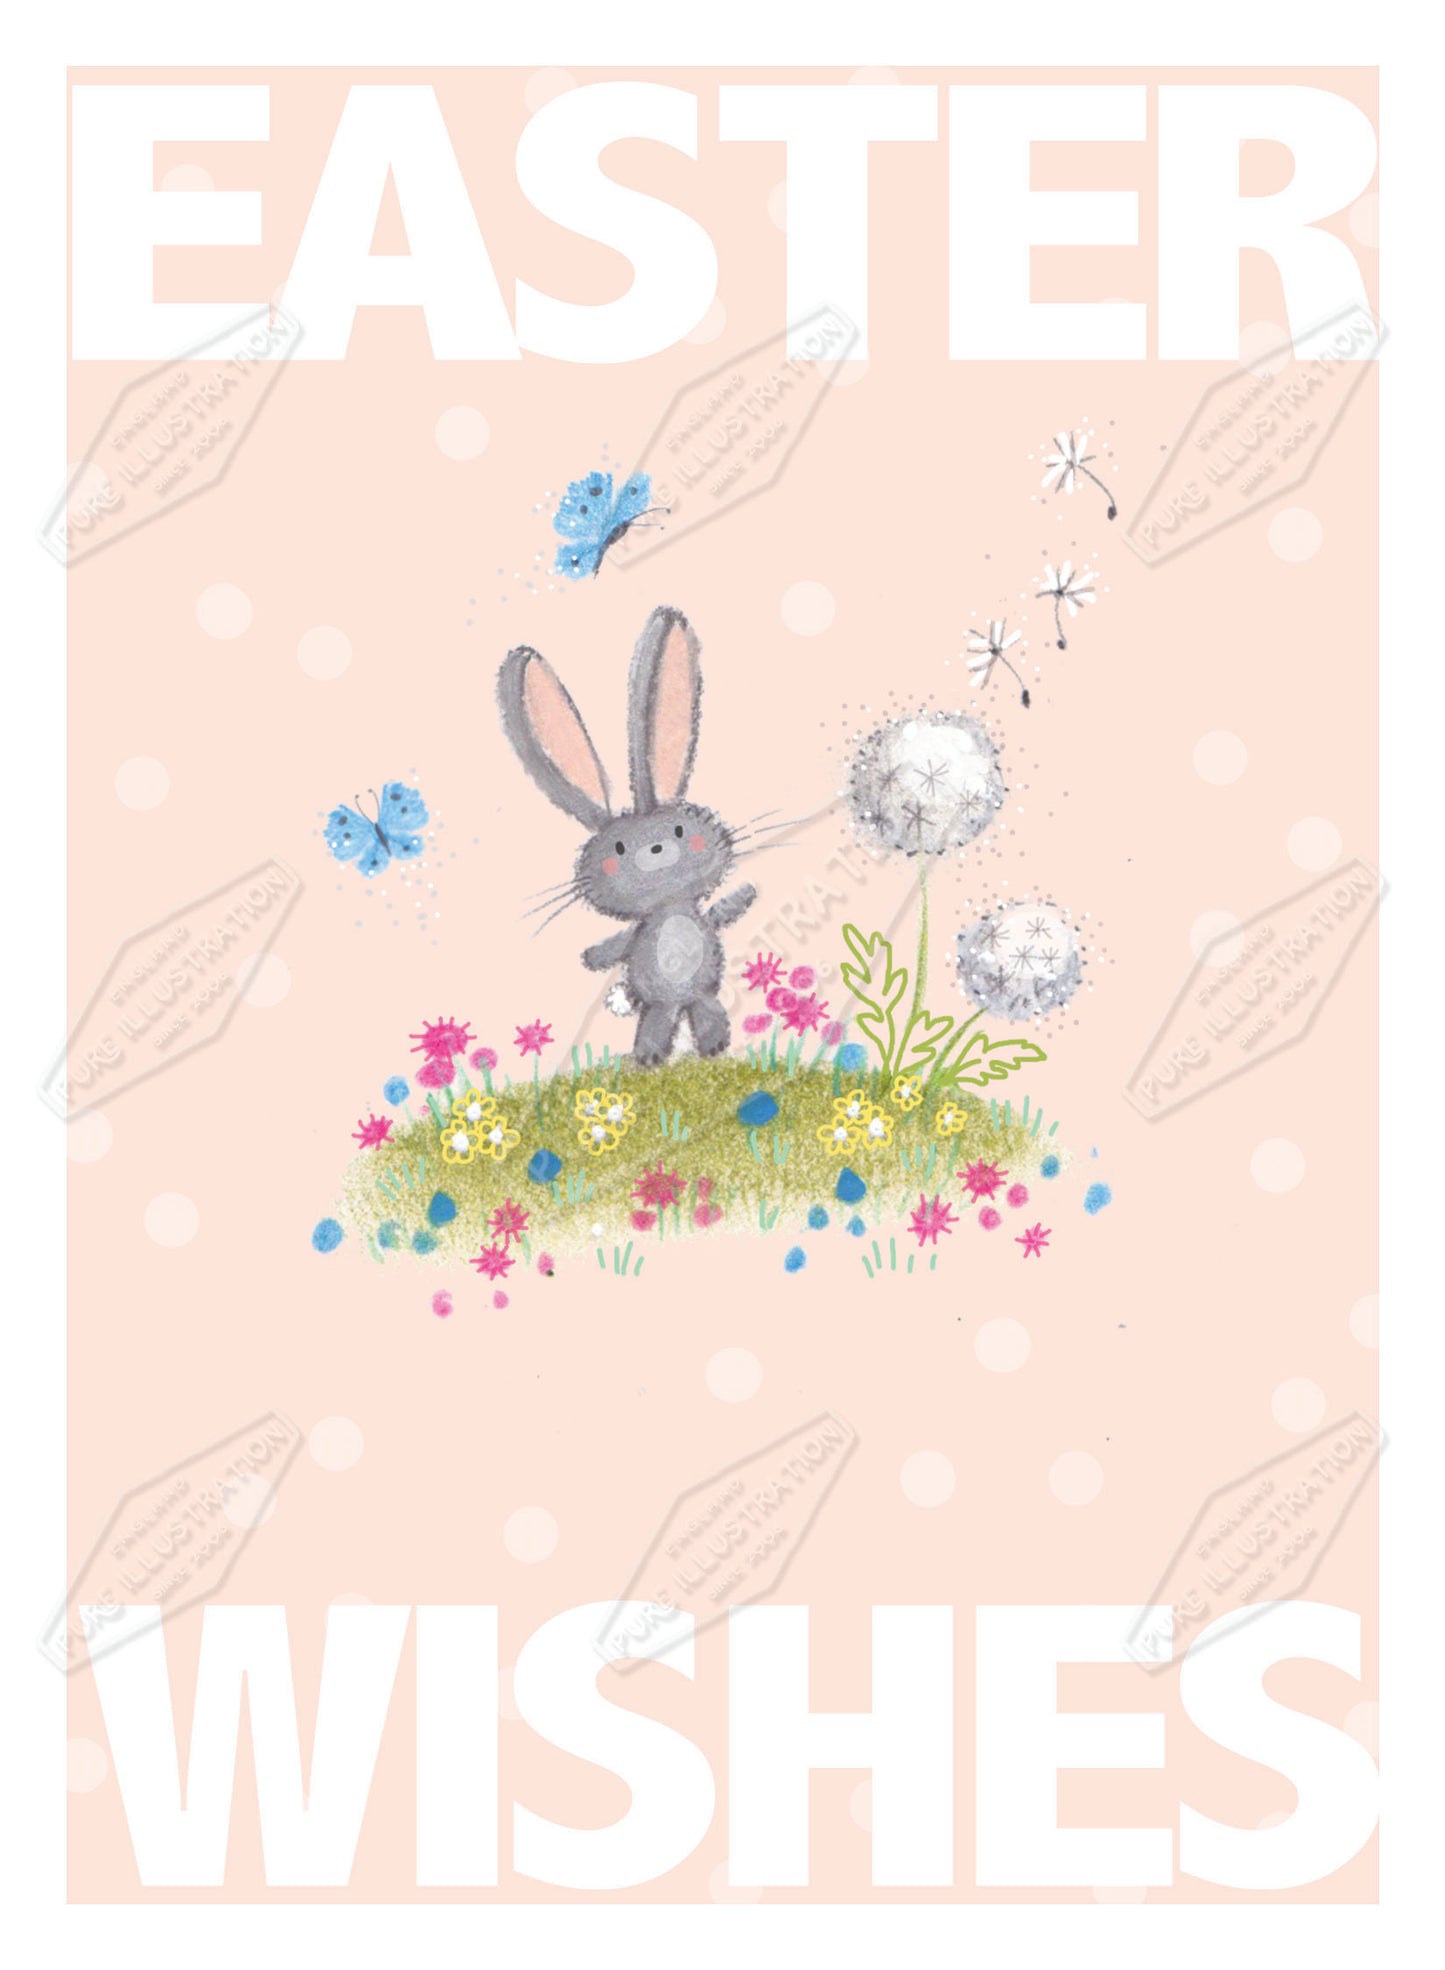 00035764AMA - Ally Marie is represented by Pure Art Licensing Agency - Easter Greeting Card Design